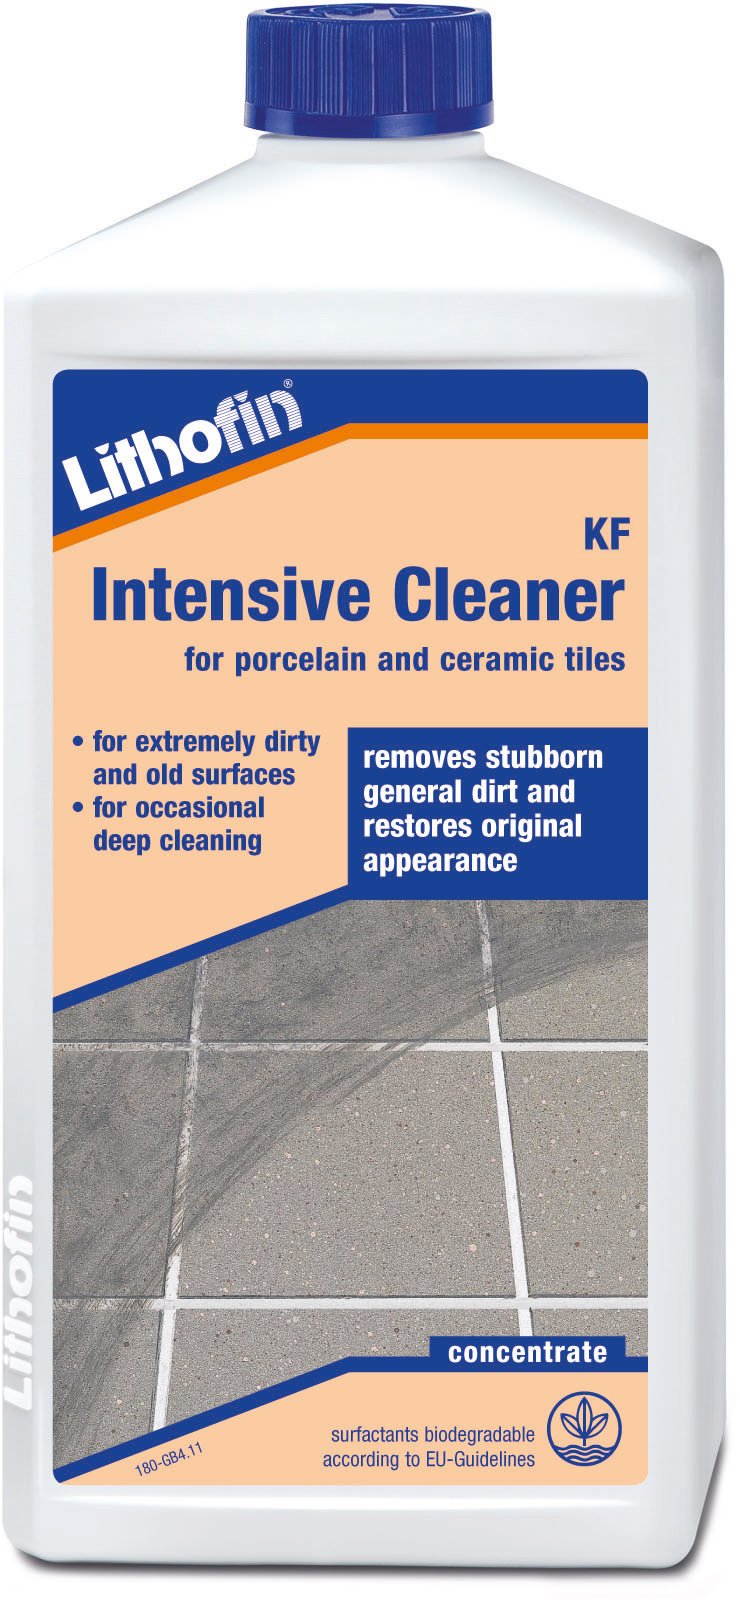 Intensive Cleaner for porcelain and ceramic times